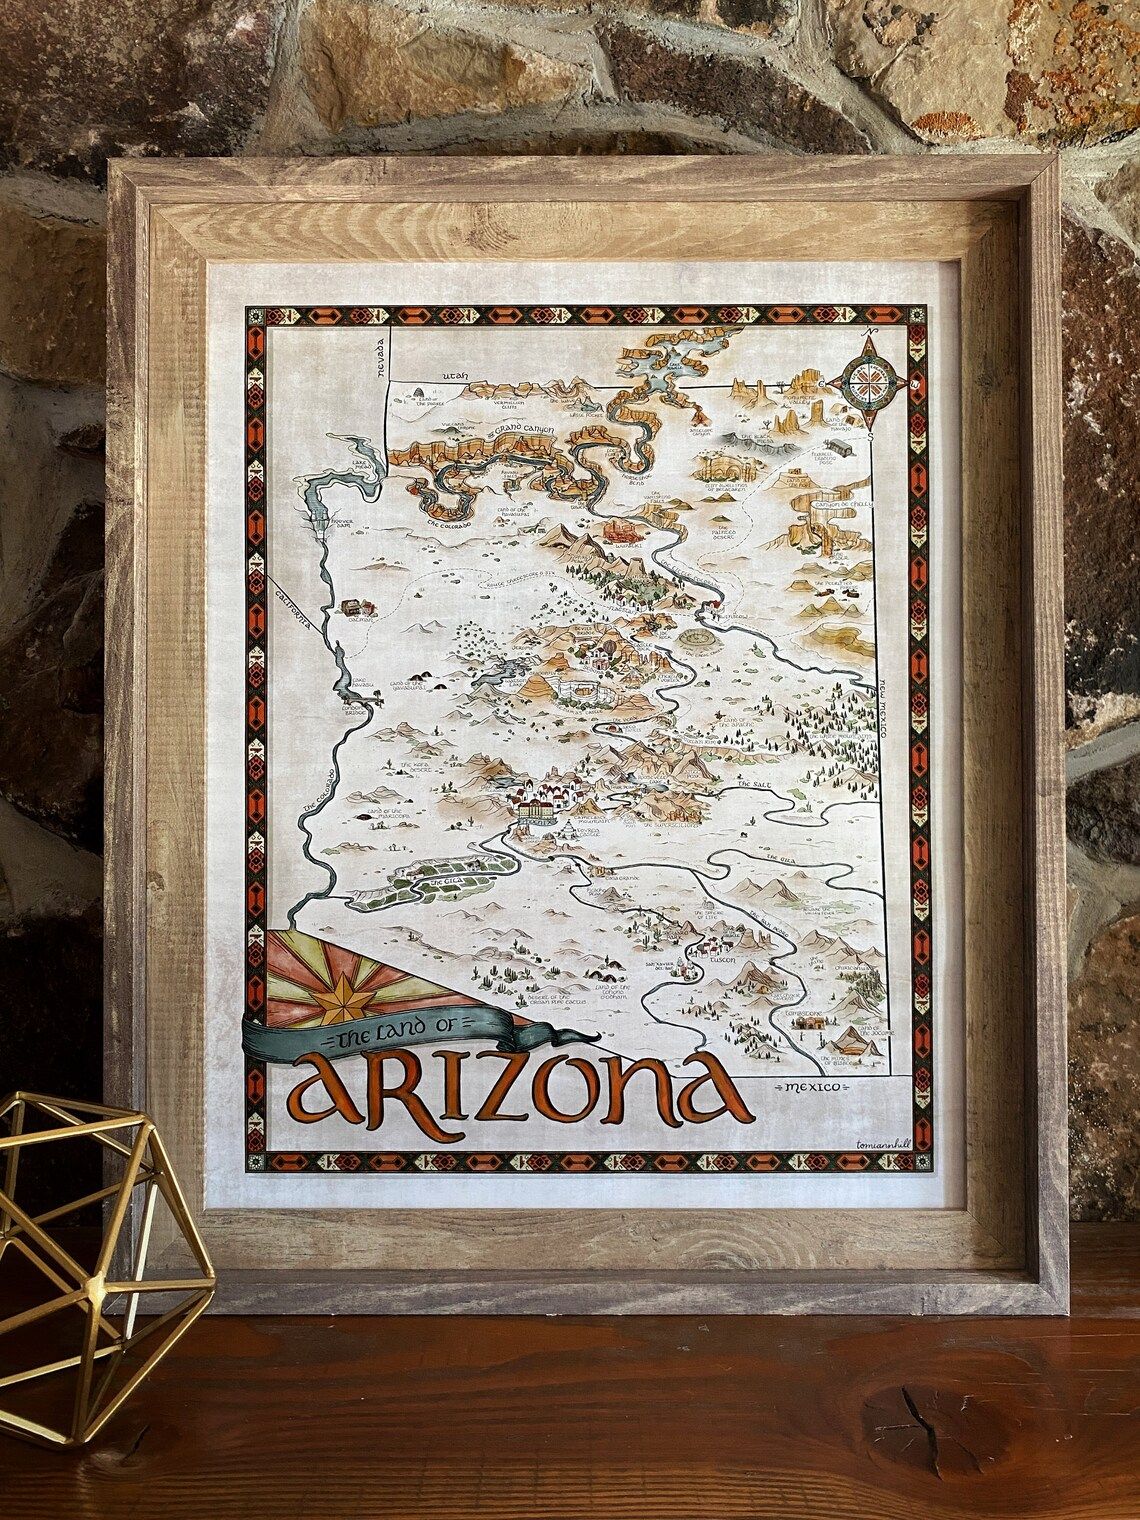 Fantasy style map of Arizona in a wood frame